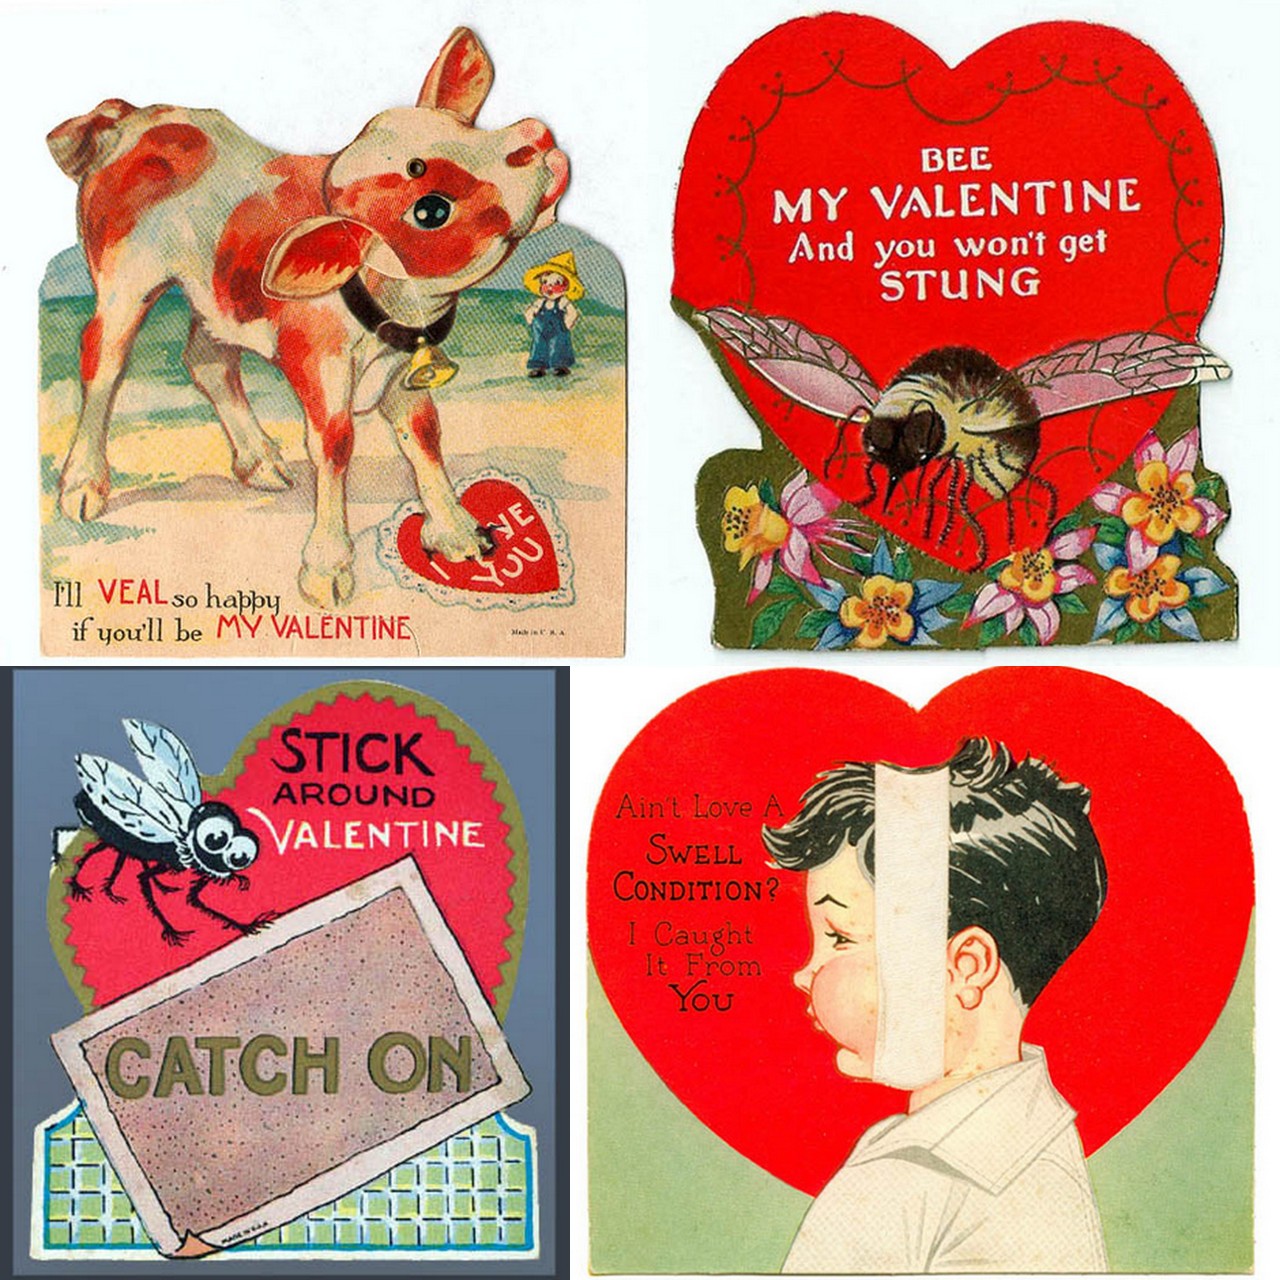 halloweencrafts:  Even More Vintage Scary Halloween Valentines from pageofbat’s